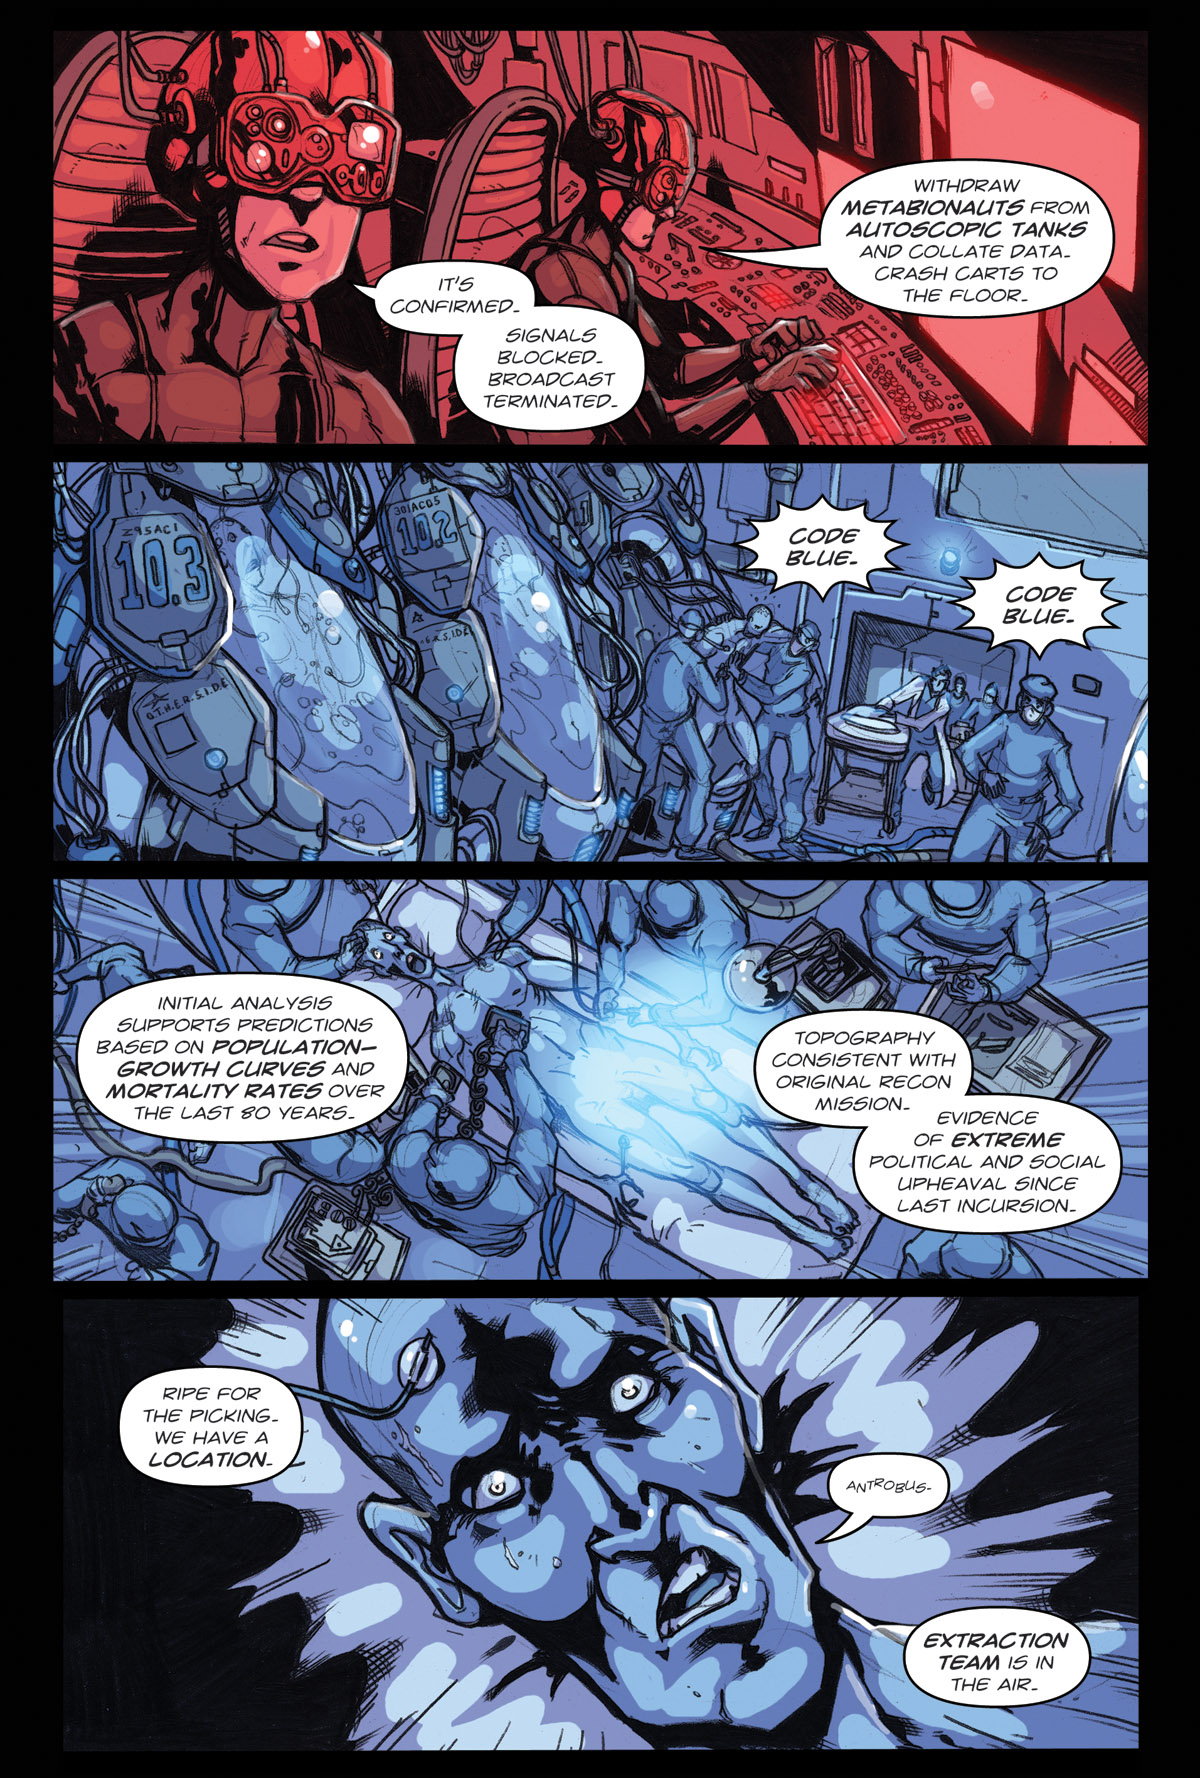 Afterlife Inc. | Near Life | Page 7